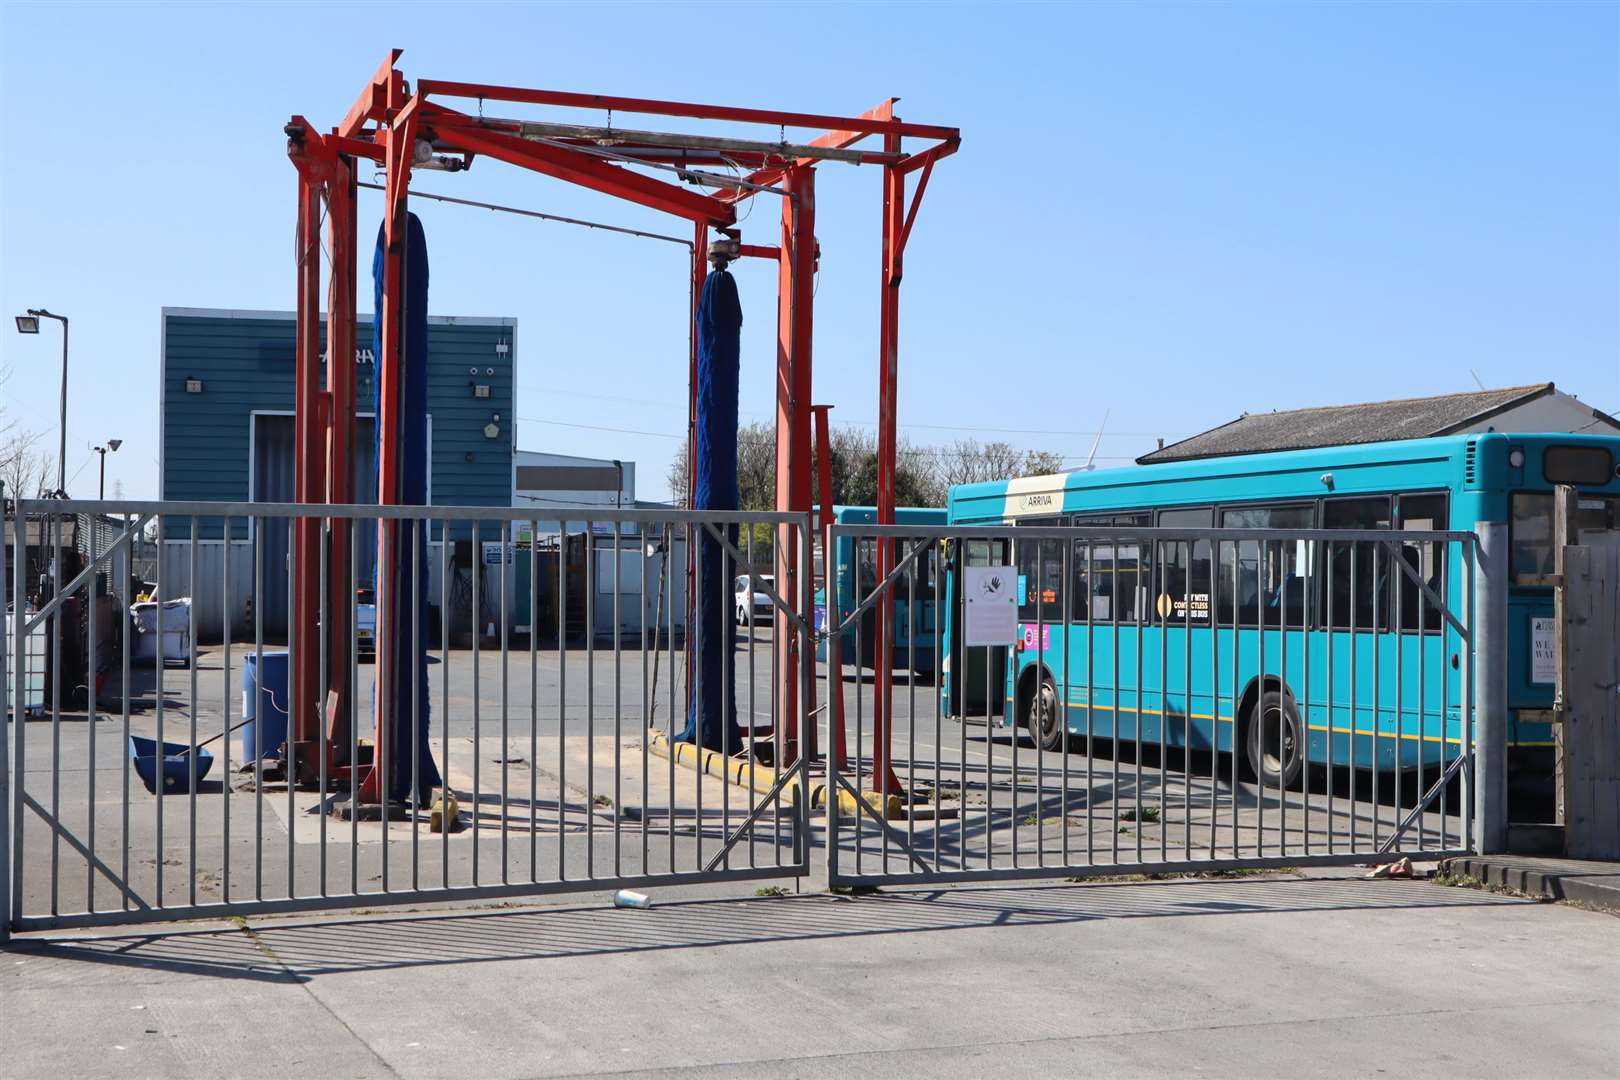 Arriva bus depot in Sheerness